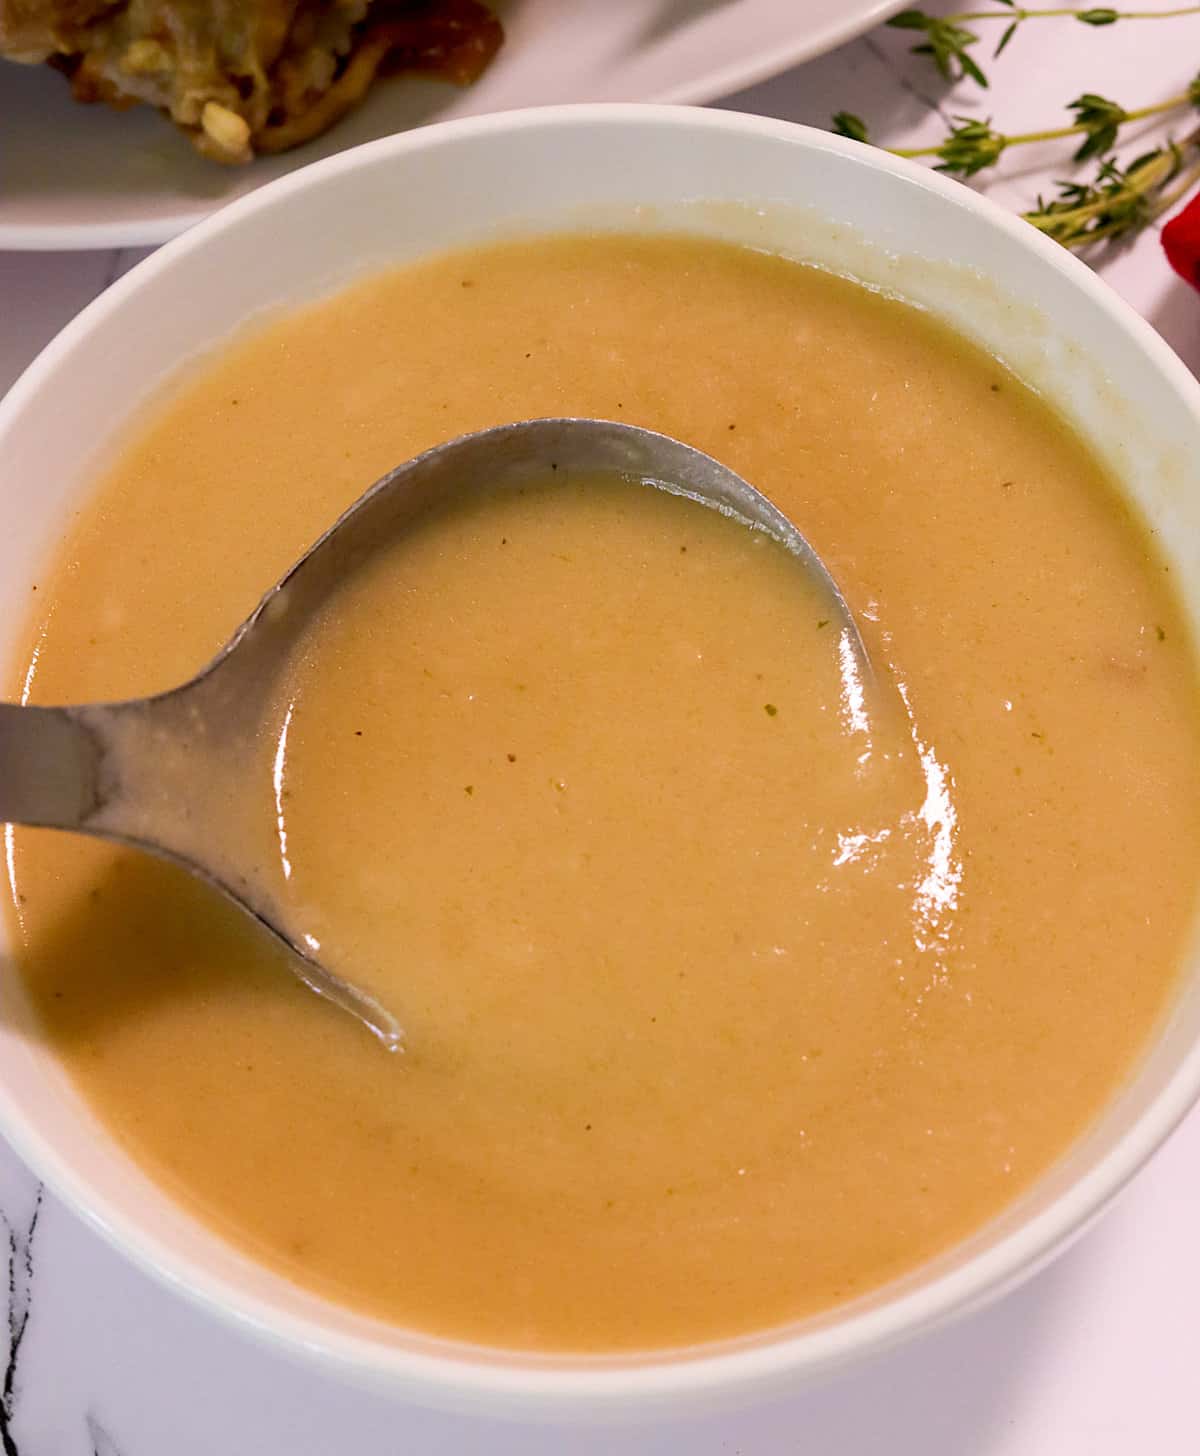 Serving up fresh homemade turkey gravy without drippings